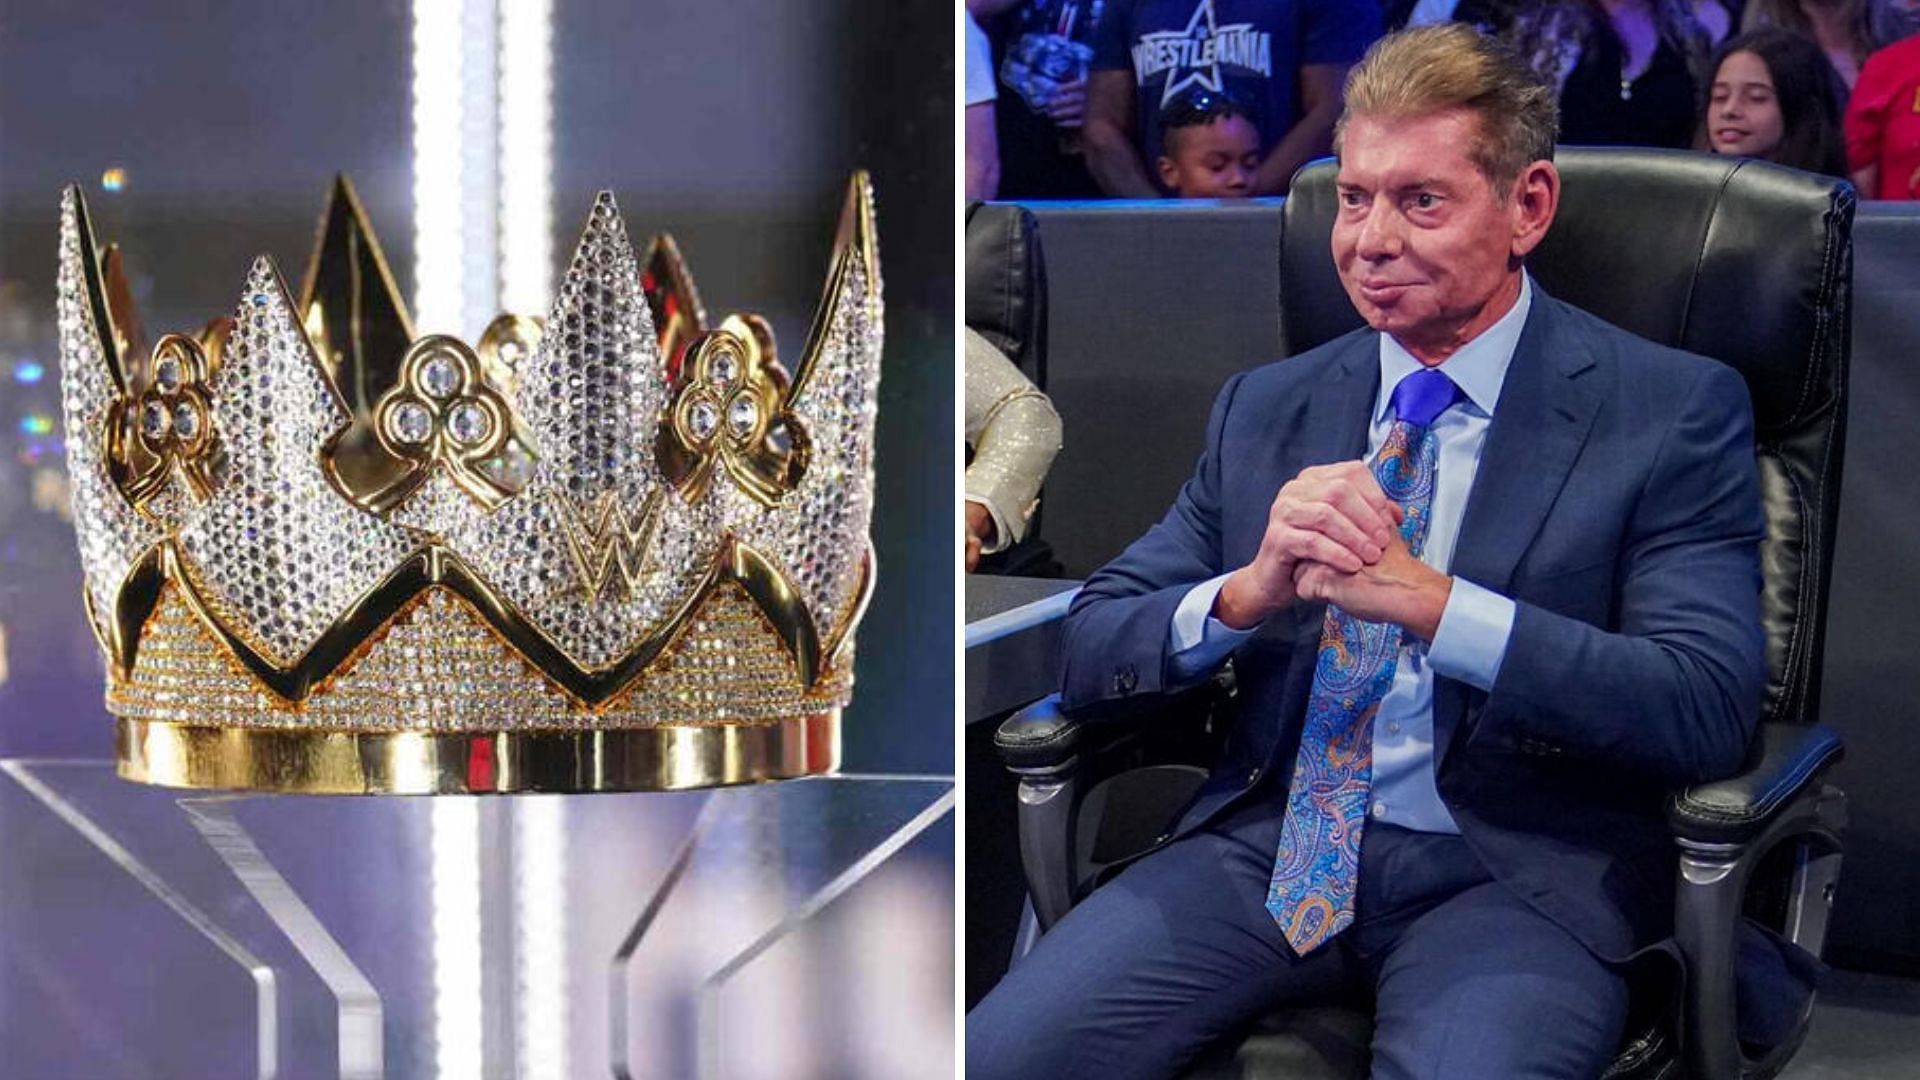 Vince McMahon has elevated many superstars through King of the Ring